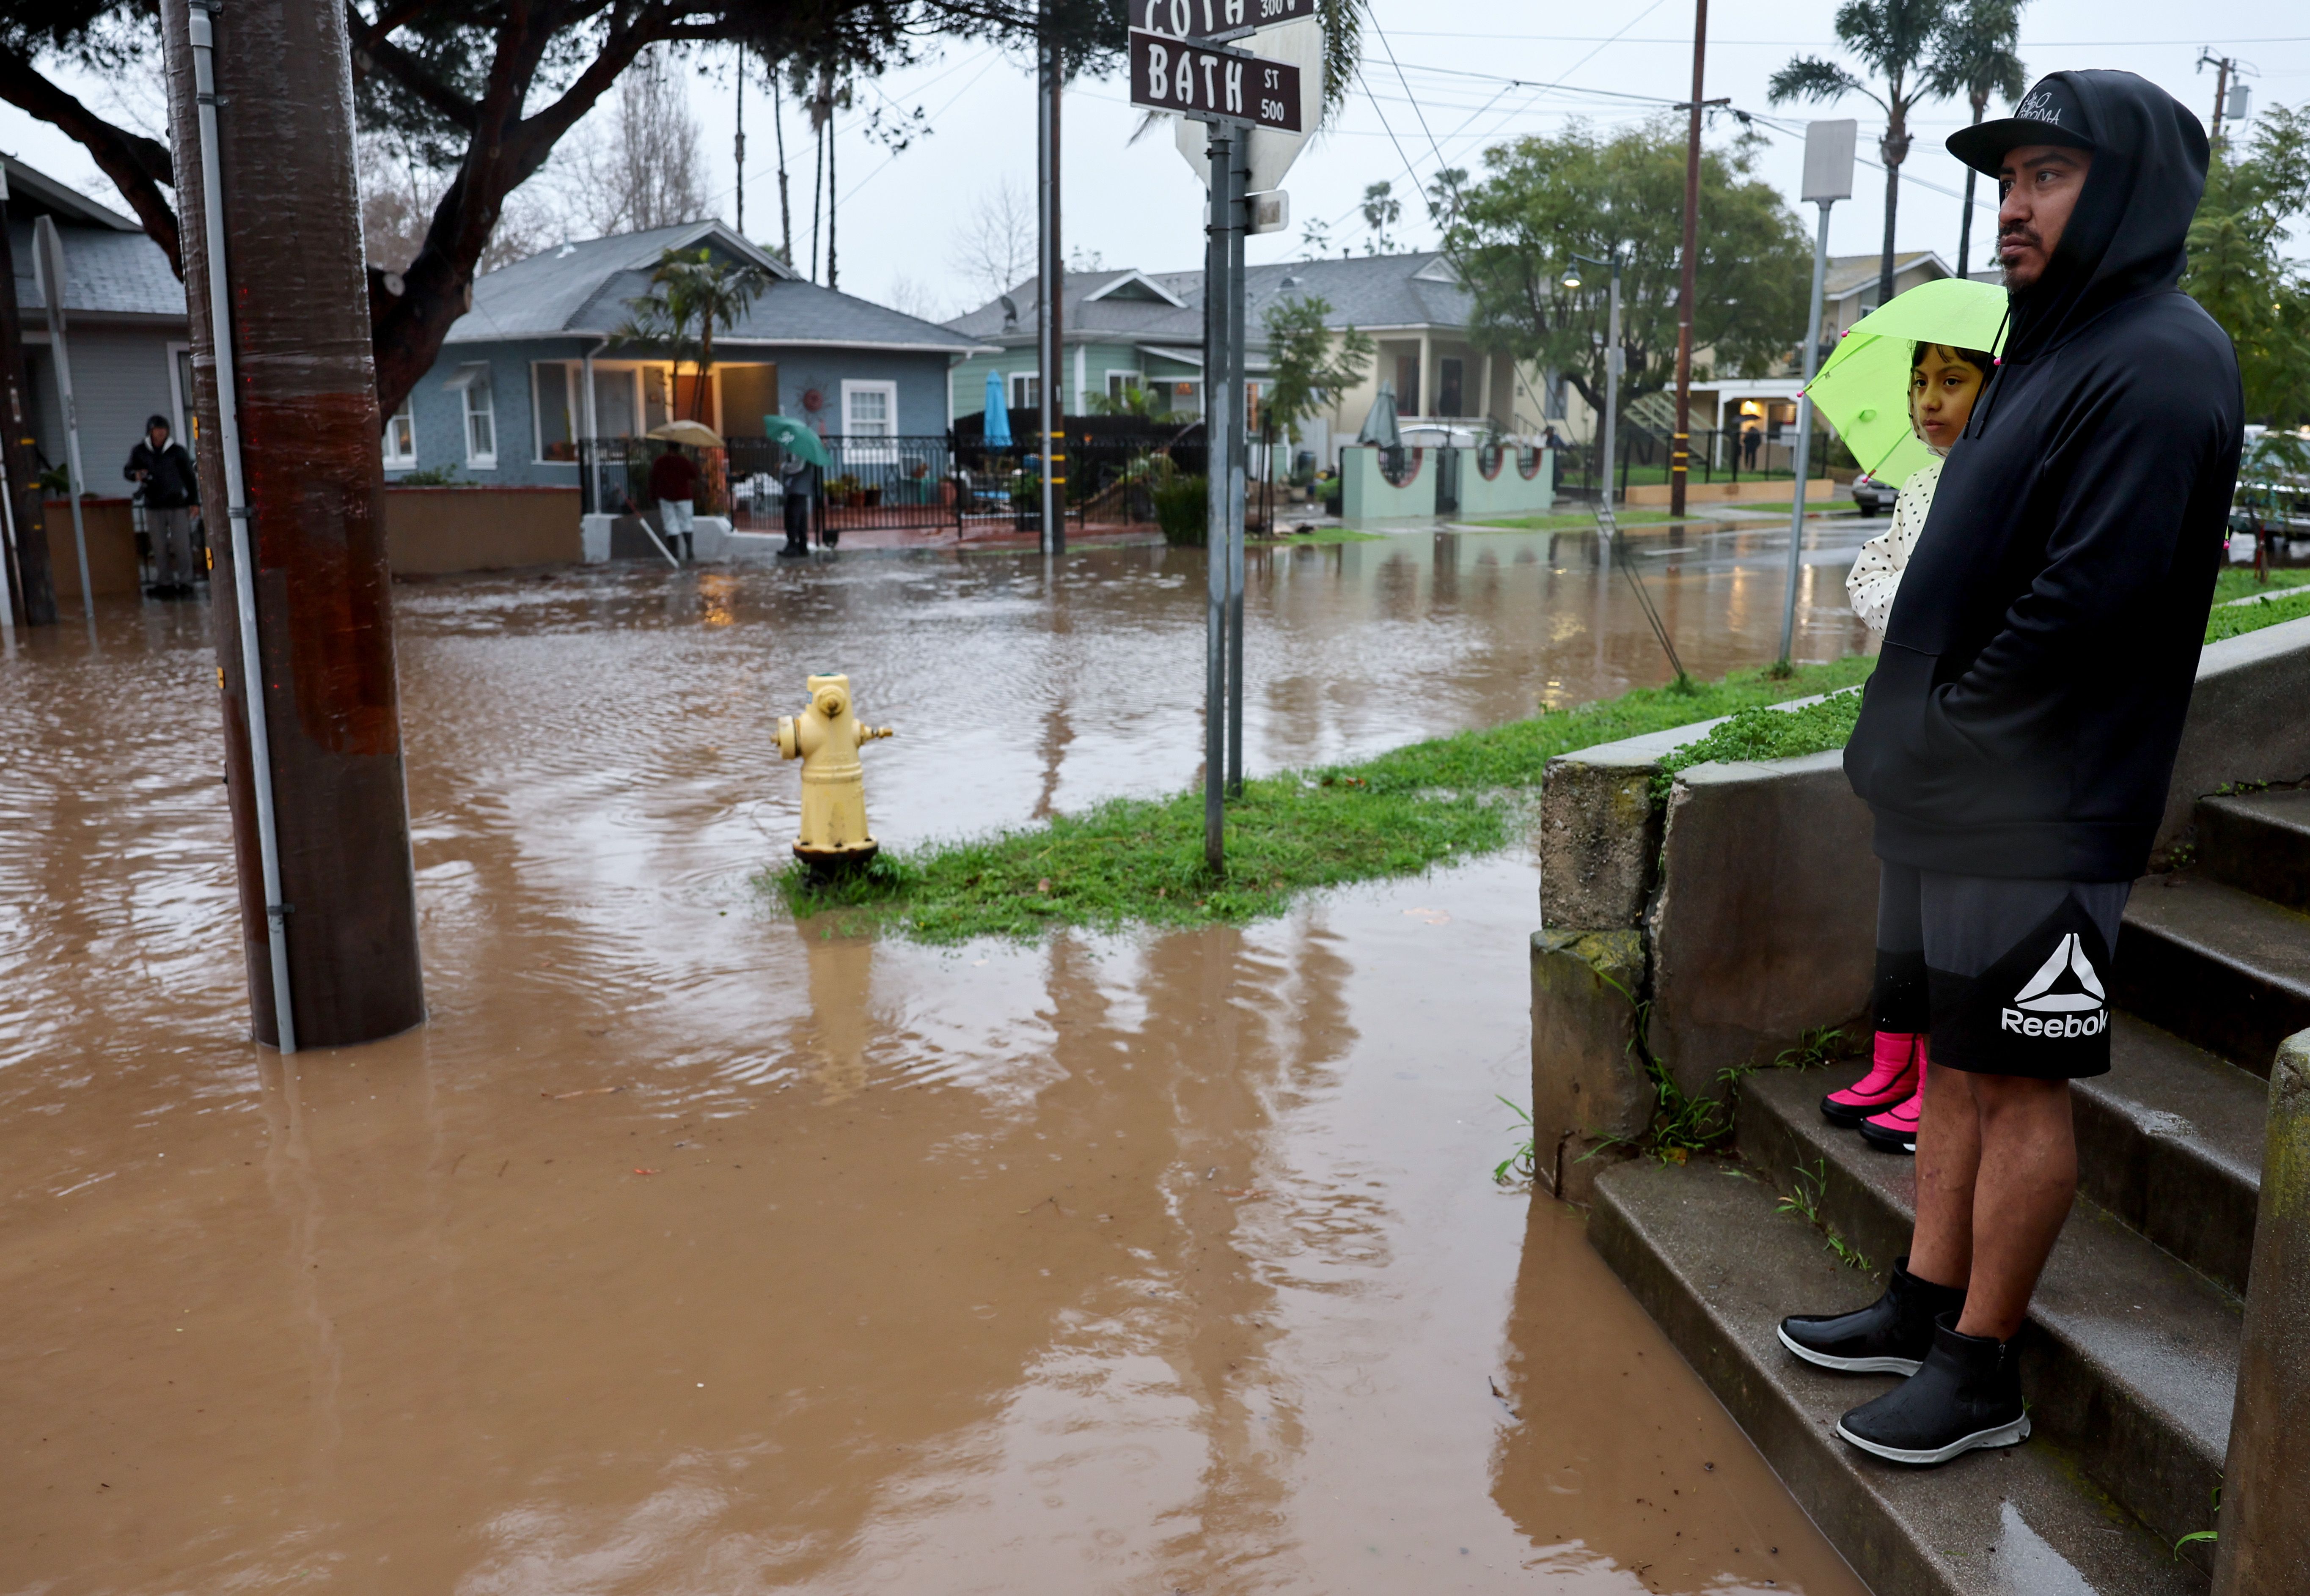  Residents stand along a flooded street as a powerful long-duration atmospheric river storm, the second in less than a week, impacts California on February 4, 2024 in Santa Barbara, California. The storm is delivering potential for widespread flooding, landslides and power outages while dropping heavy rain and snow across the region.